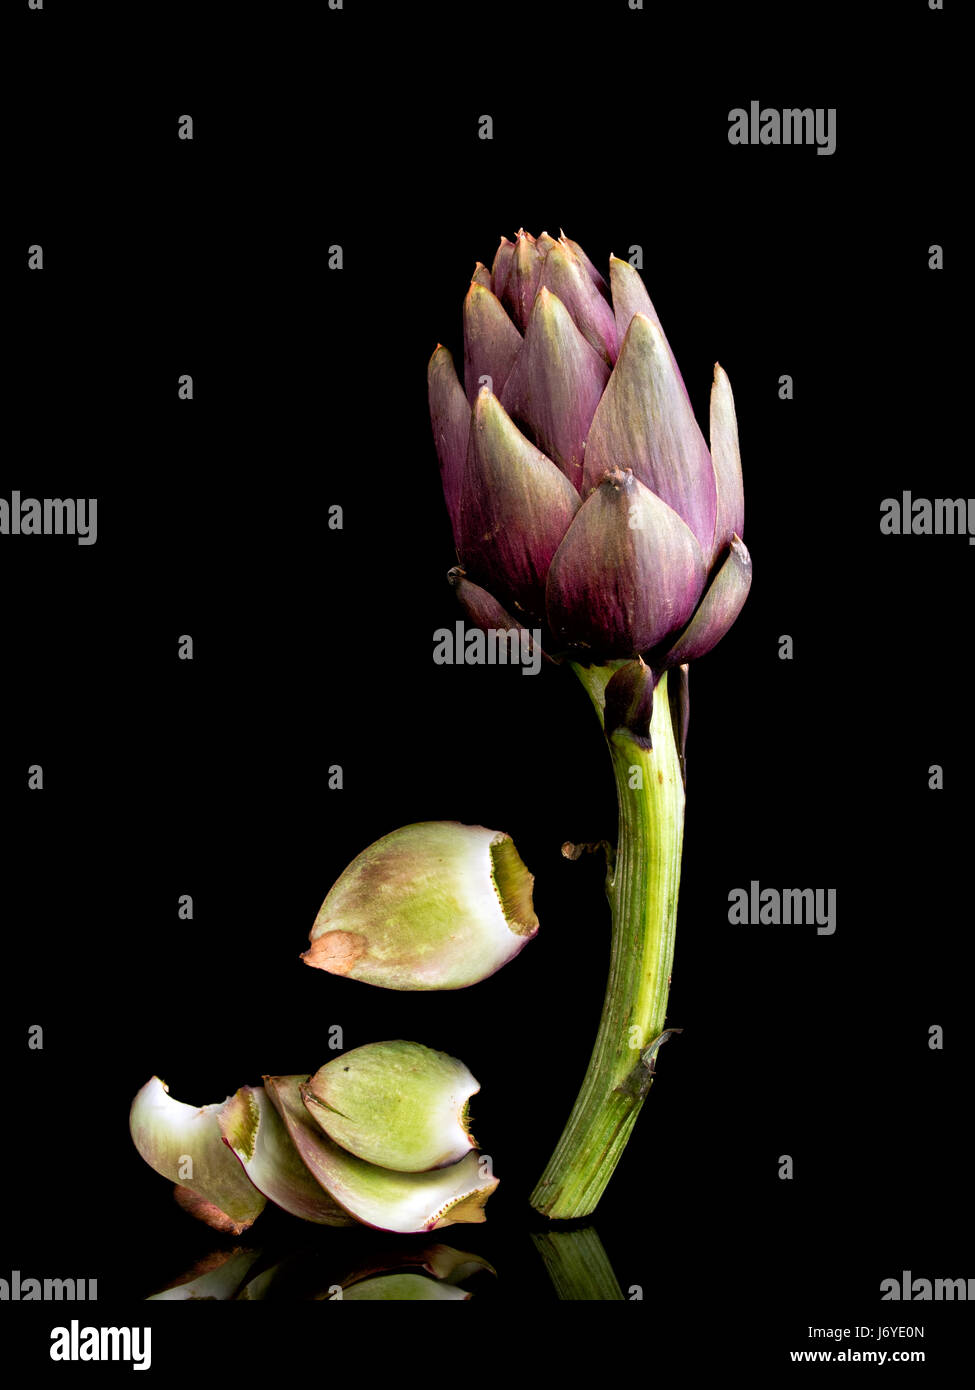 Purple artichoke. Healthy vegetable, high in cynarin,folate, antioxidents and vitamins. Stock Photo